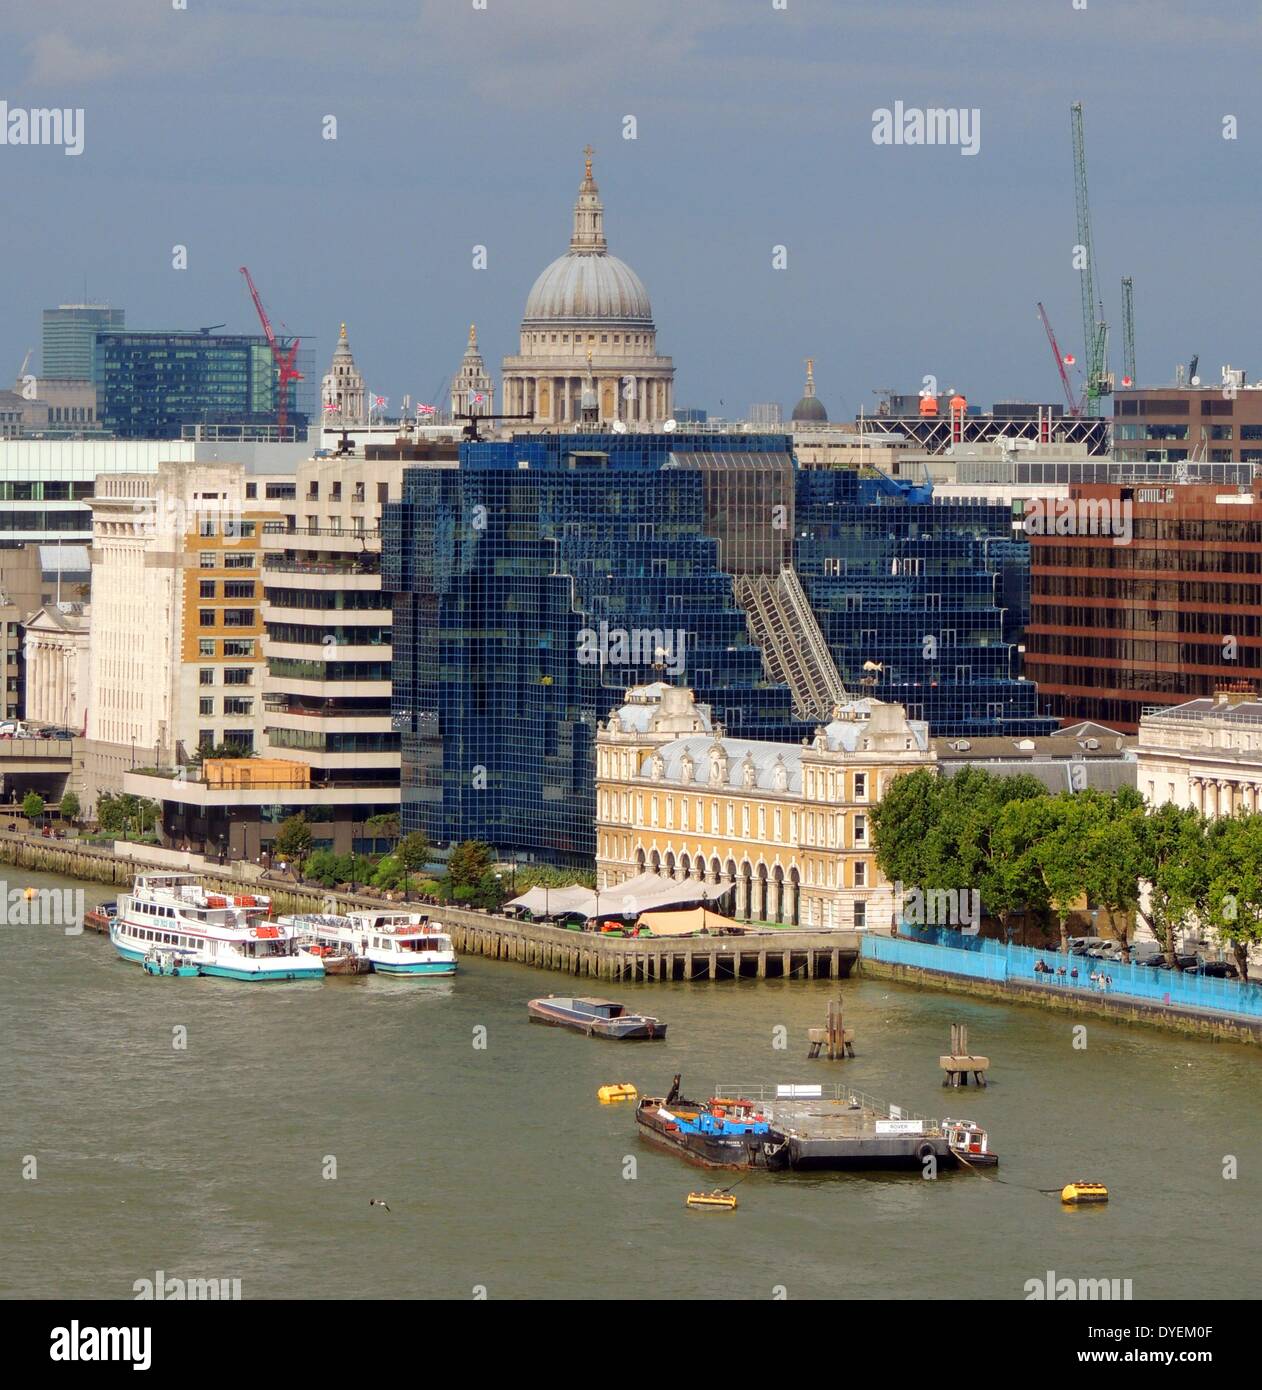 View of the Dome of St Paul's Cathedral from the Thames London 2013.  Church of England cathedral, the seat of the Bishop of London and mother church of the Diocese of London. Completed in 1720 in an English Baroque style. Stock Photo